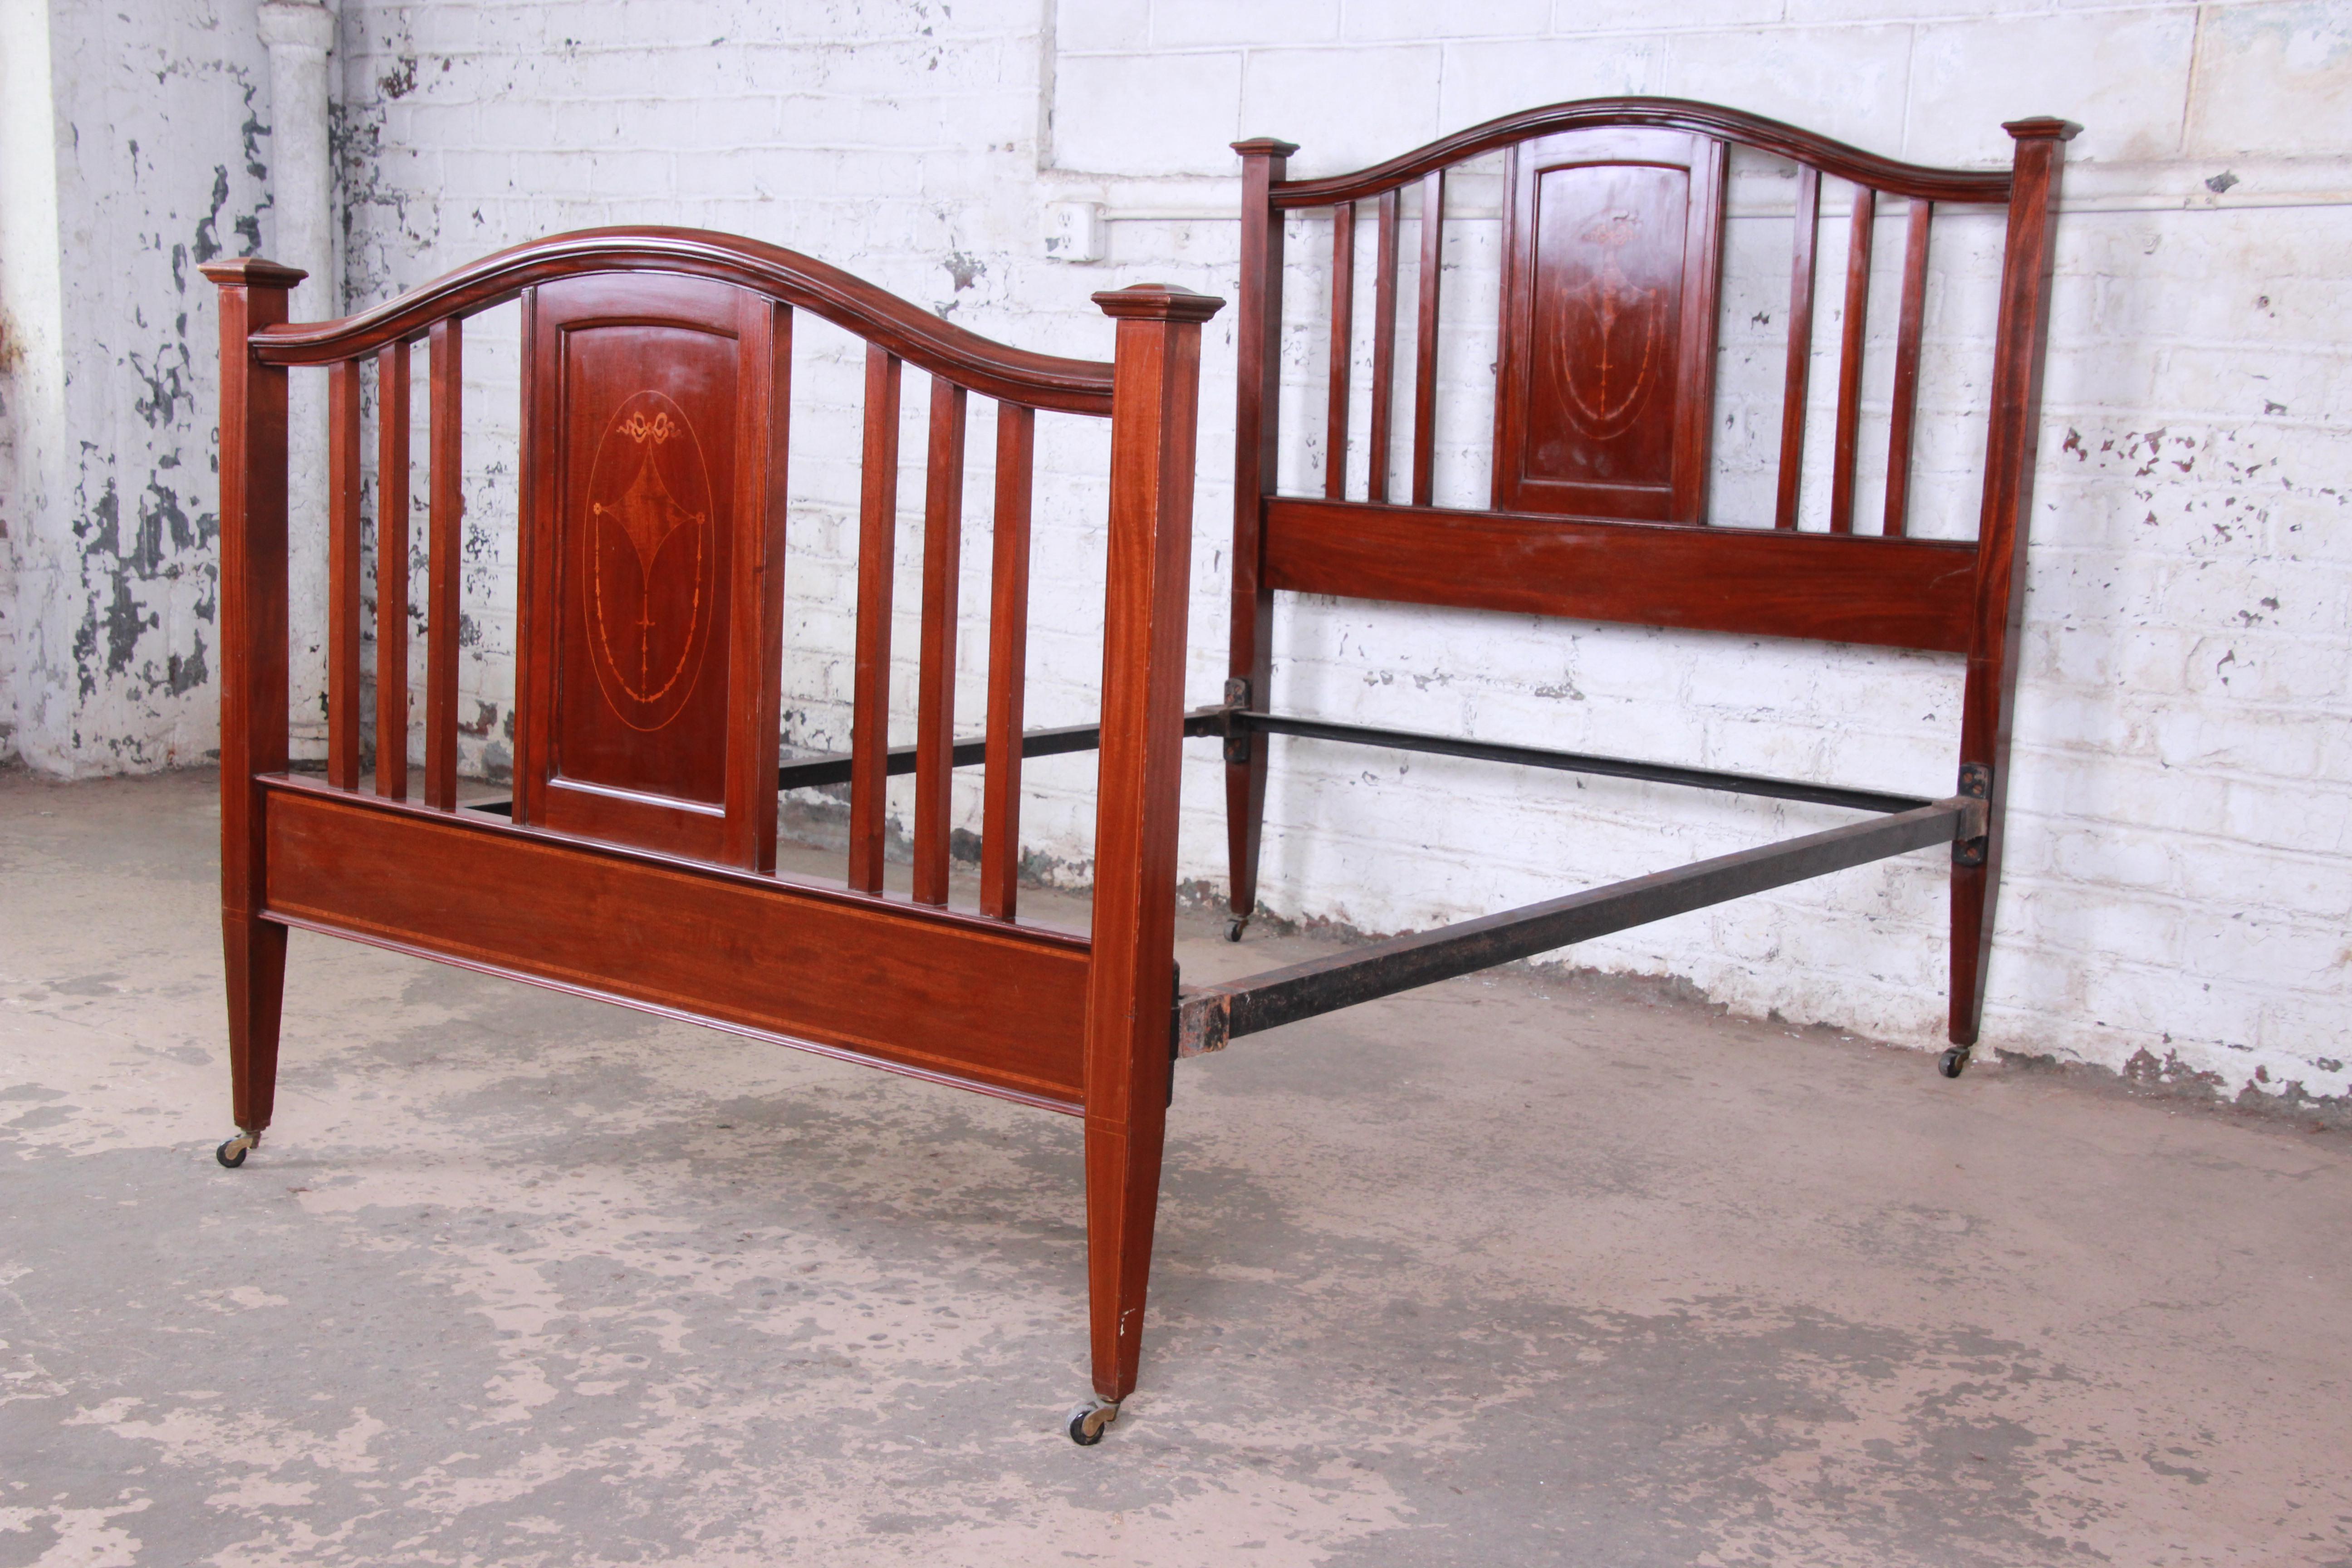 A gorgeous antique English Arts & Crafts inlaid mahogany bed frame. The bed features solid mahogany construction with beautiful inlaid details on both the headboard and footboard. The heavy iron side rails can support either a full or queen size